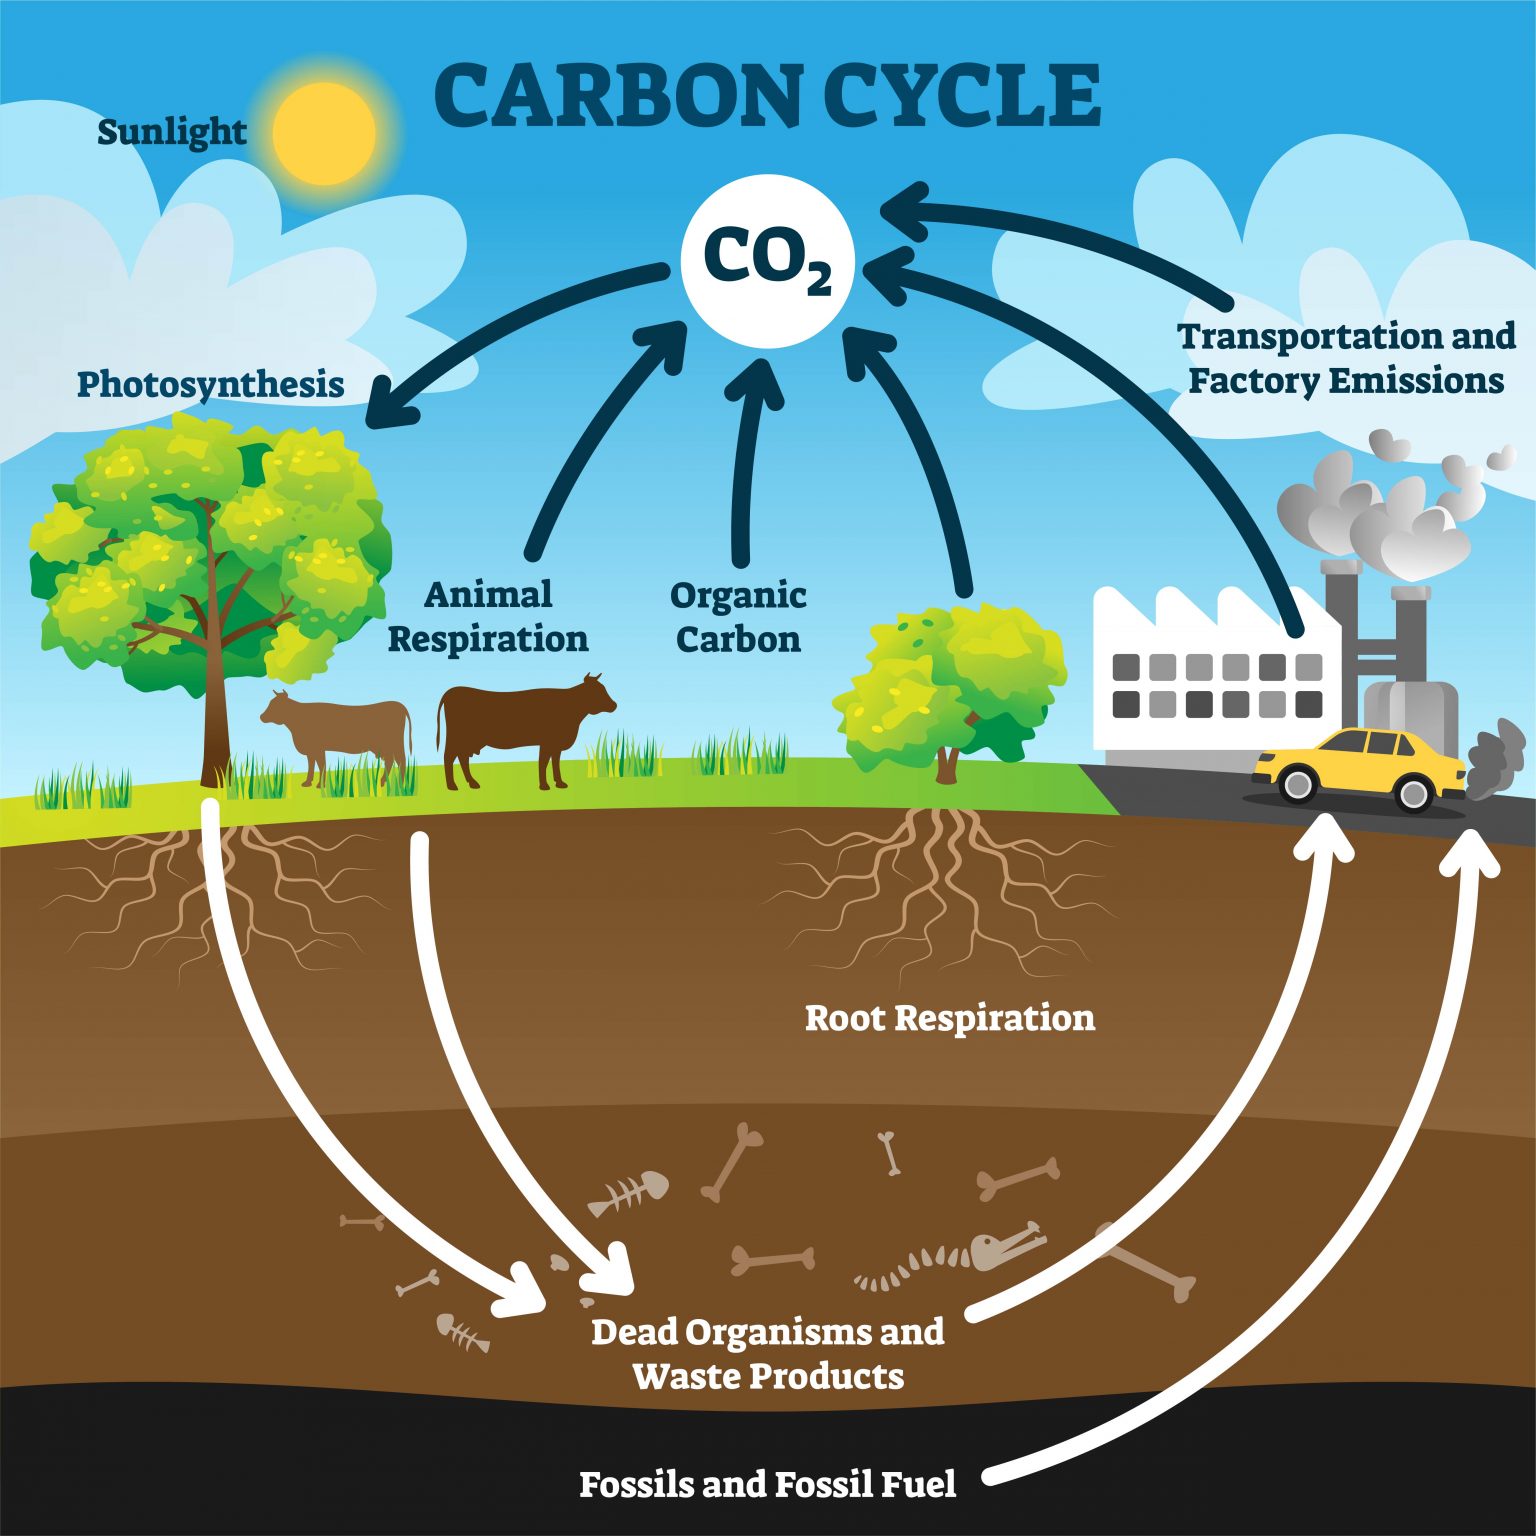 Systems Thinking and the Carbon Cycle – An Interactive Introduction to